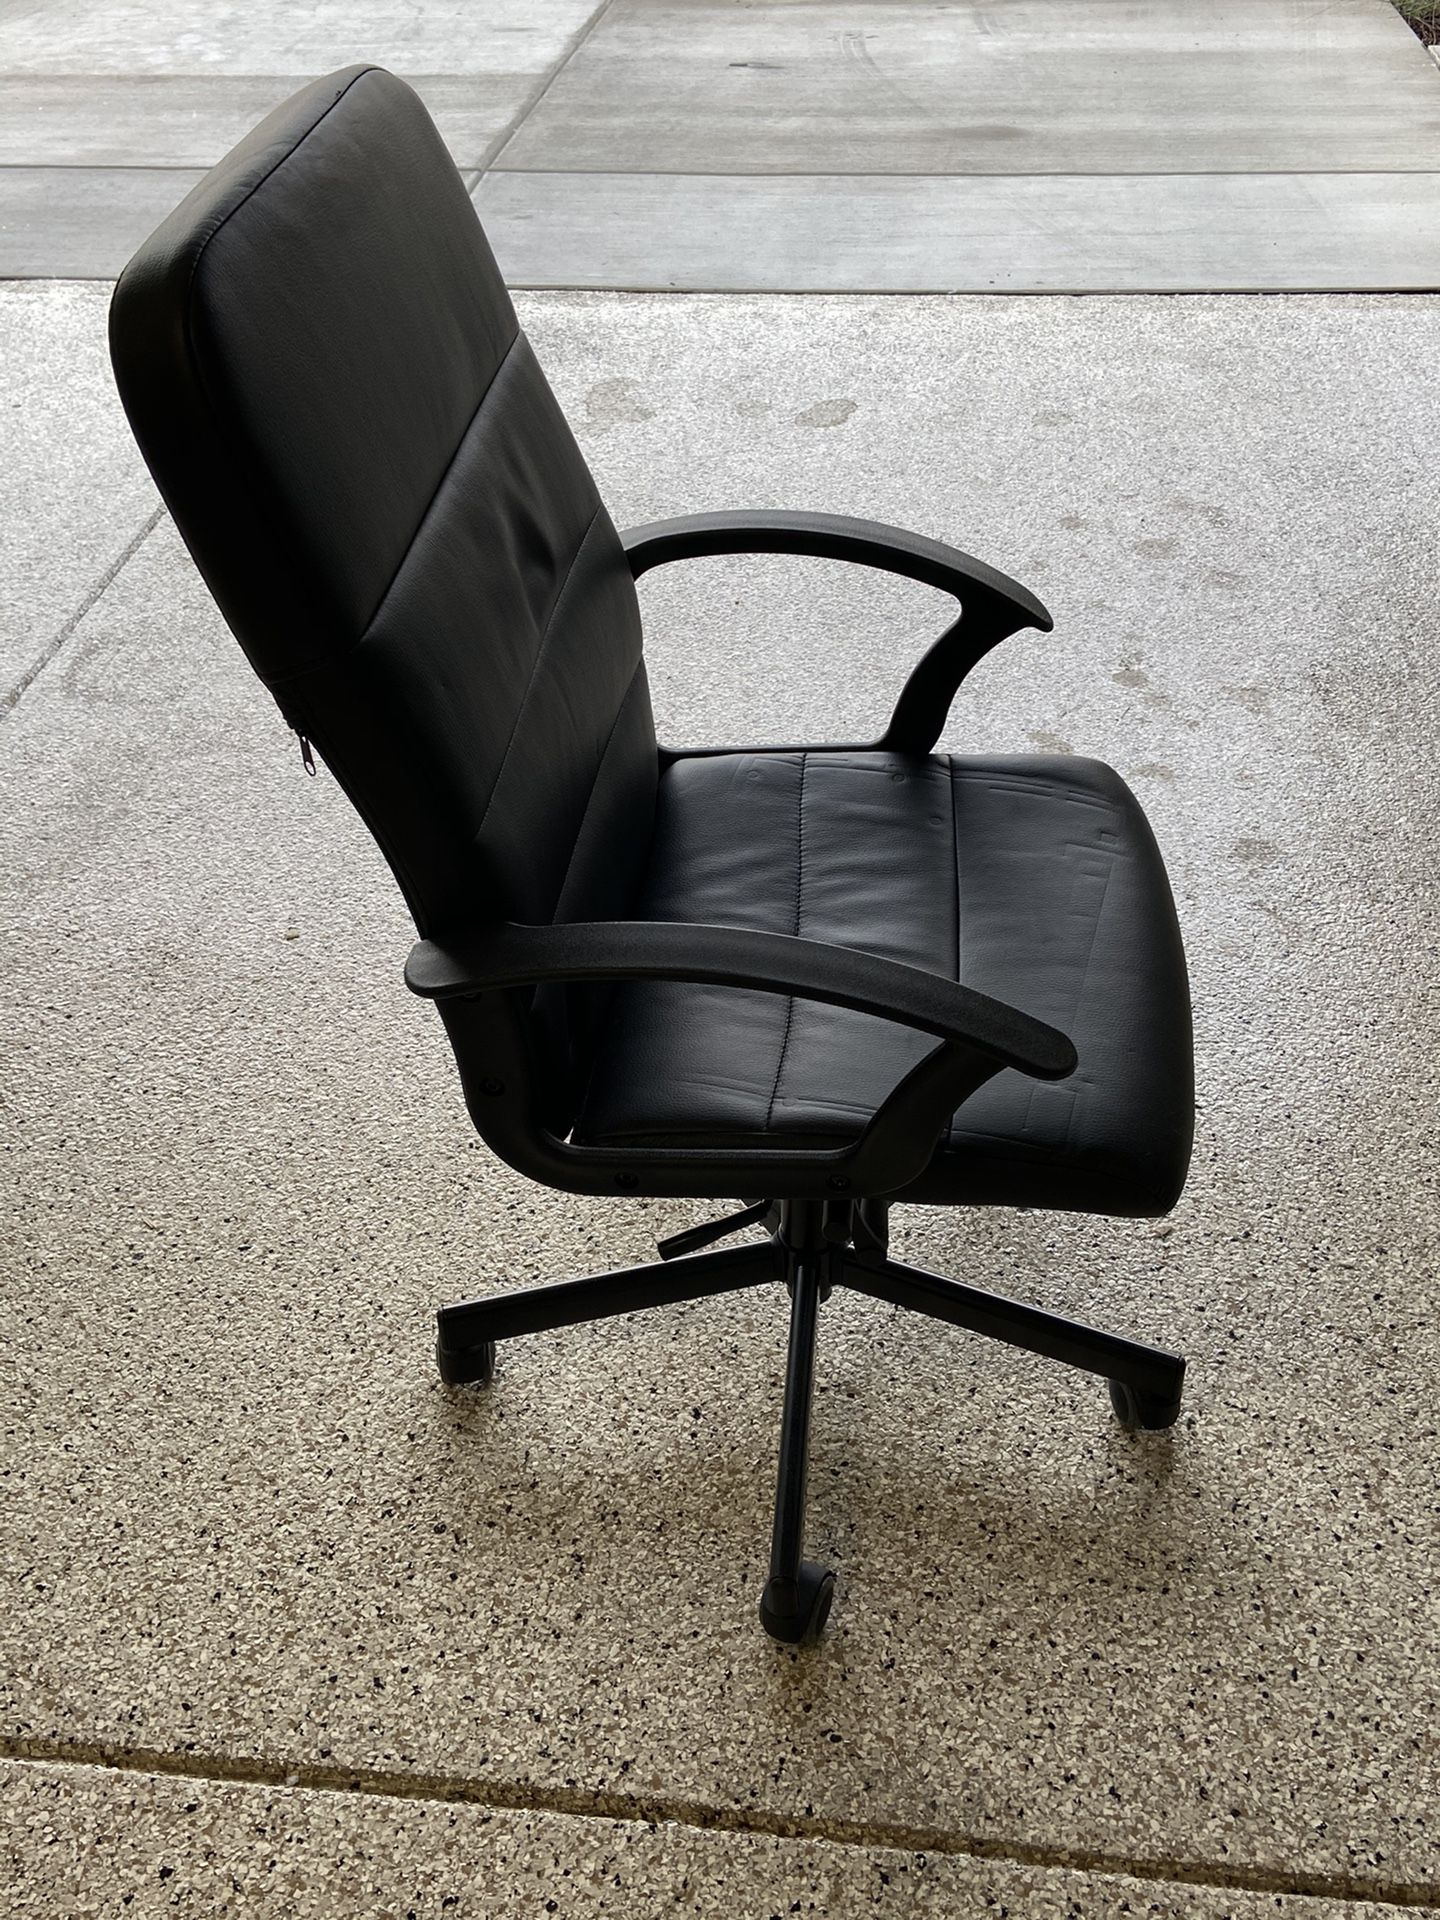 Height adjustable, swiveling office chair